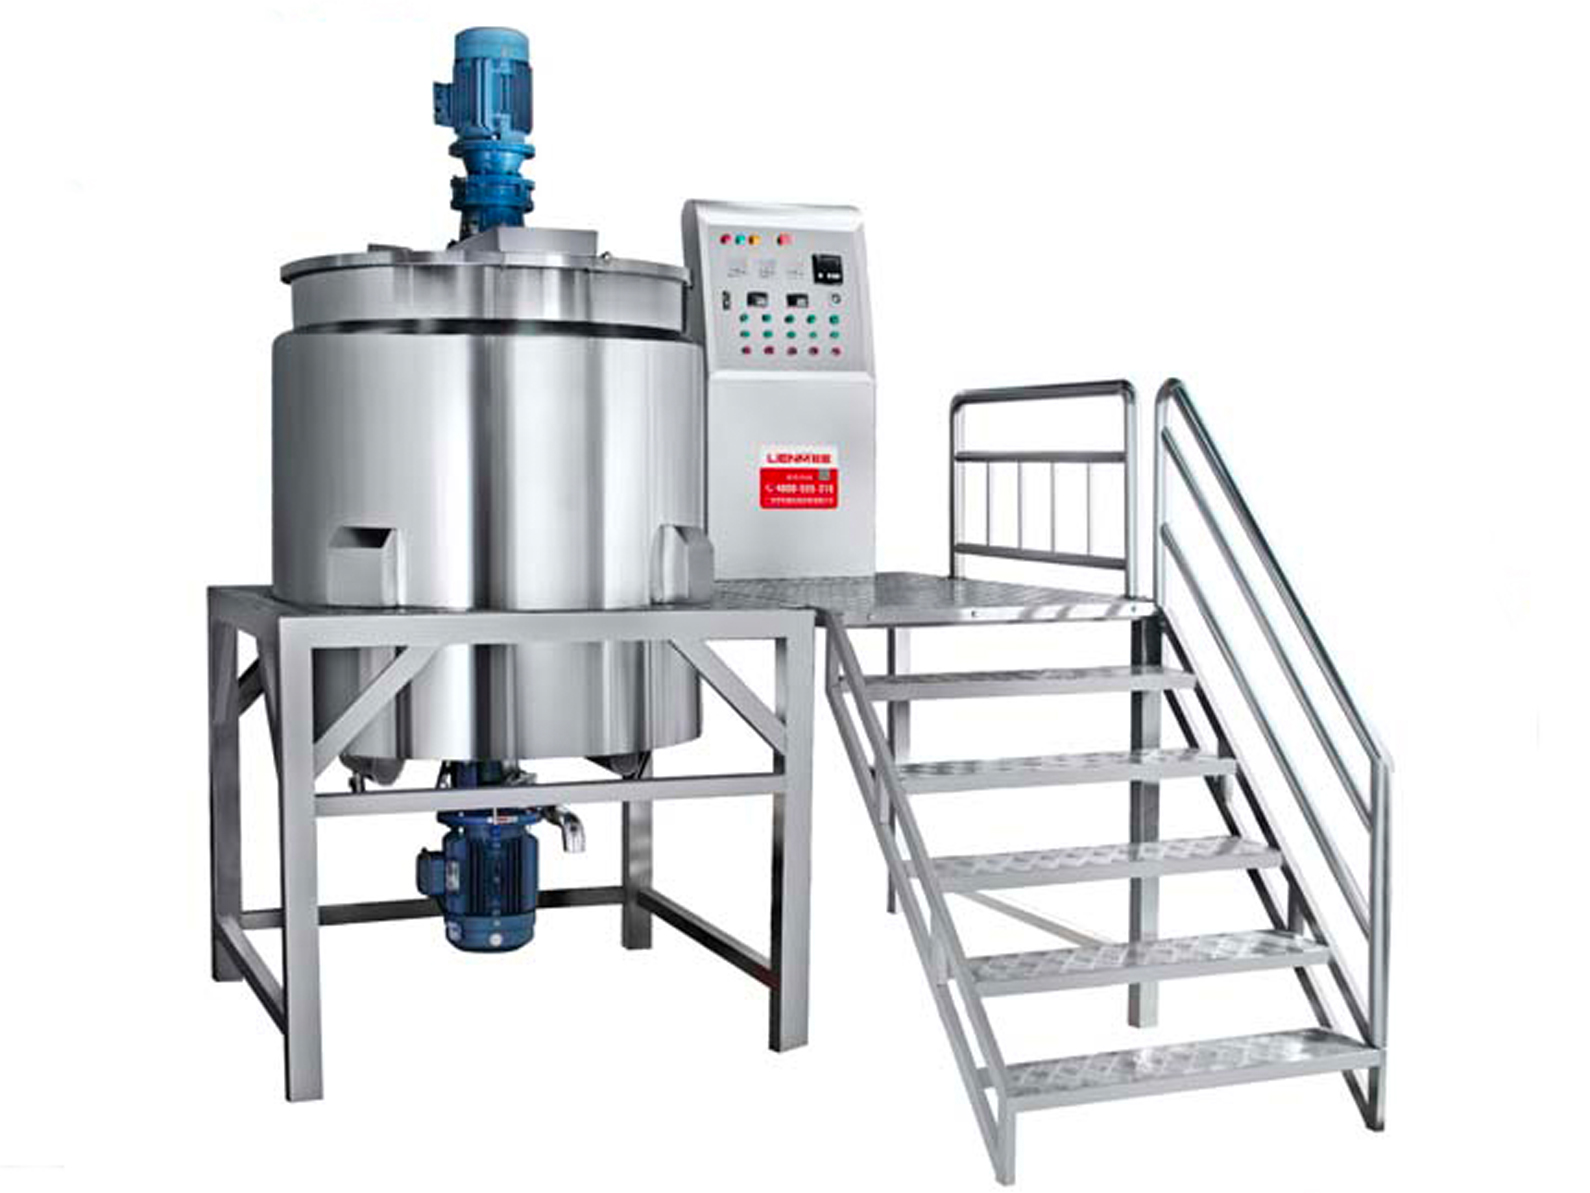 Downstream Oil & Gas Skid-Mounted Modular Process Systems